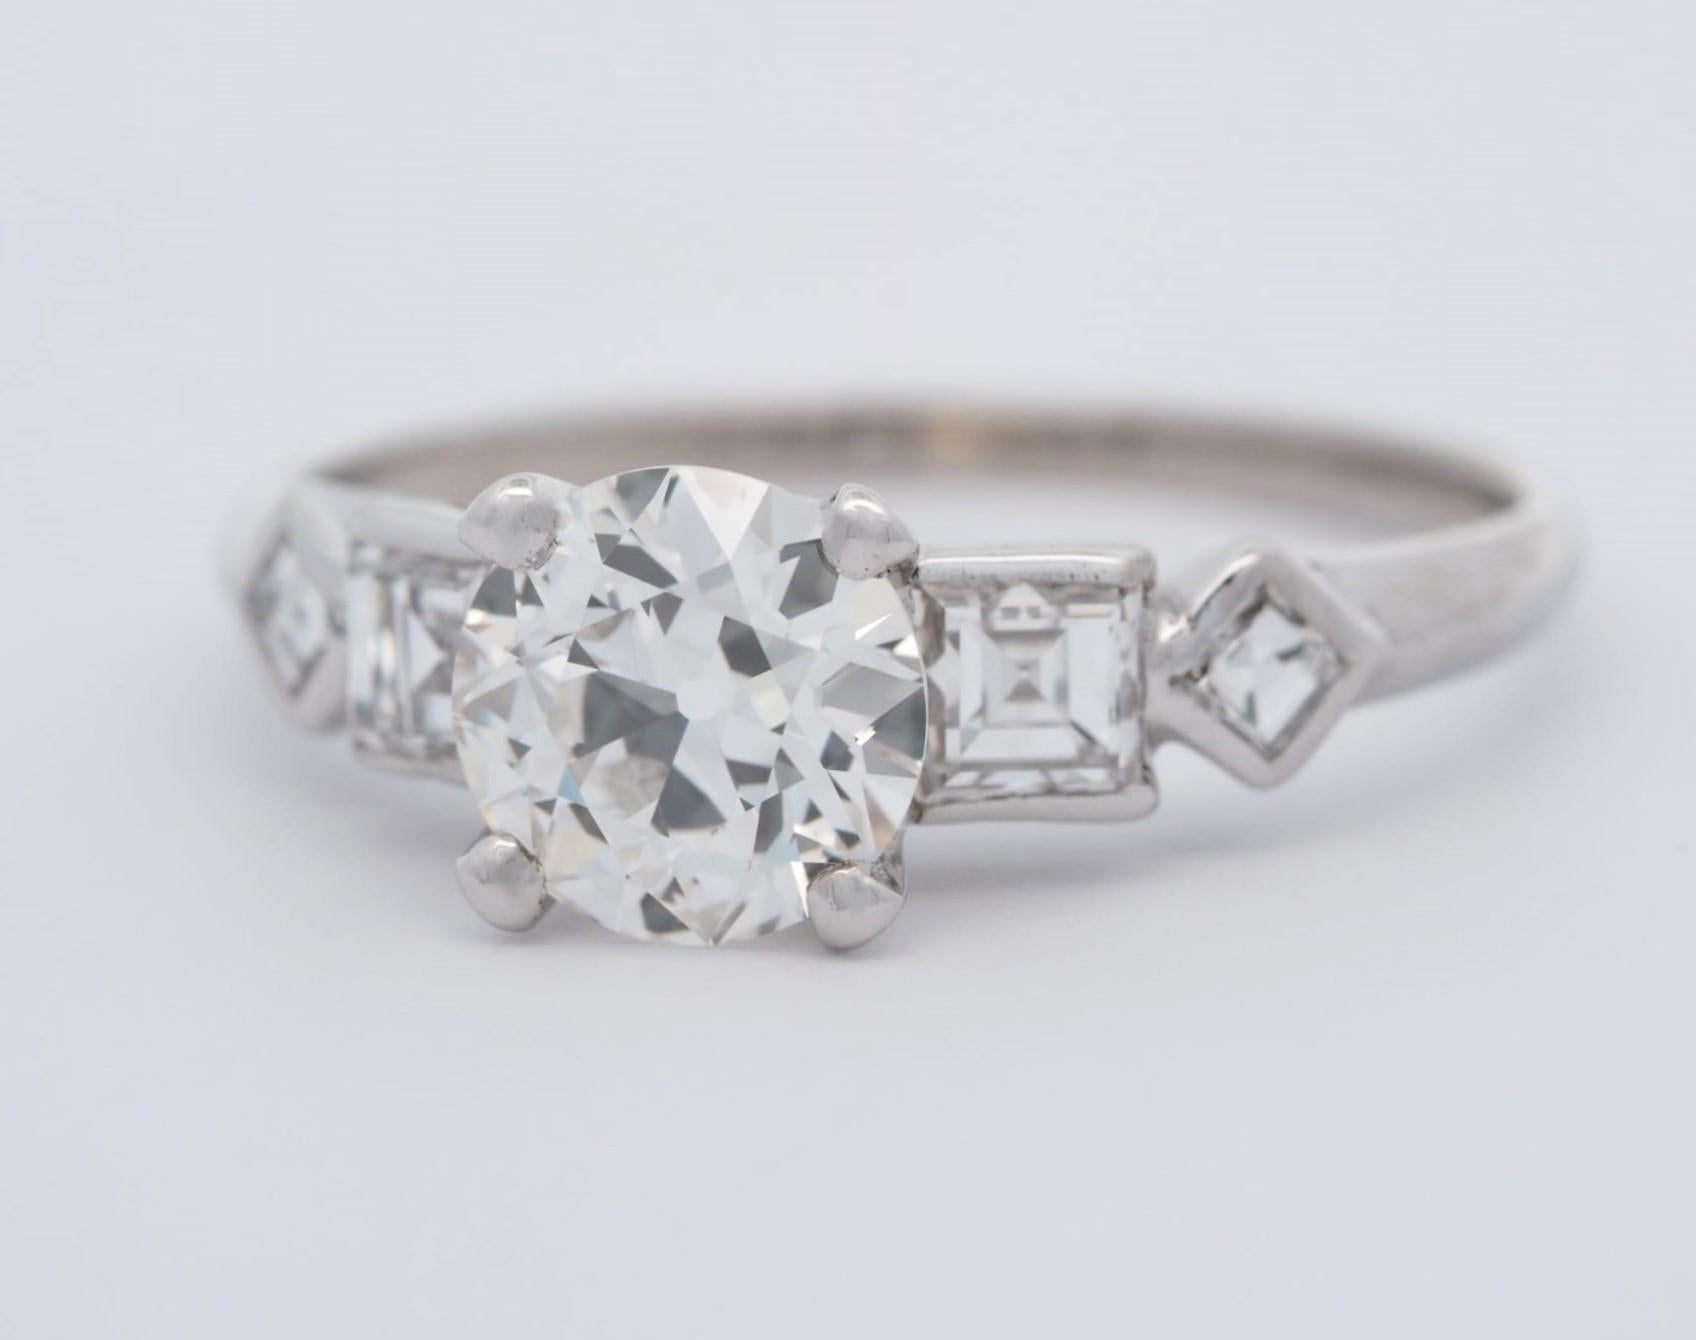 Own a piece of history with this beautiful vintage platinum engagement ring. Featuring a stunning 1.12 ct old European cut diamond, this ring is sure to make a statement. The round diamond is prong-set in a platinum band, showcasing the natural